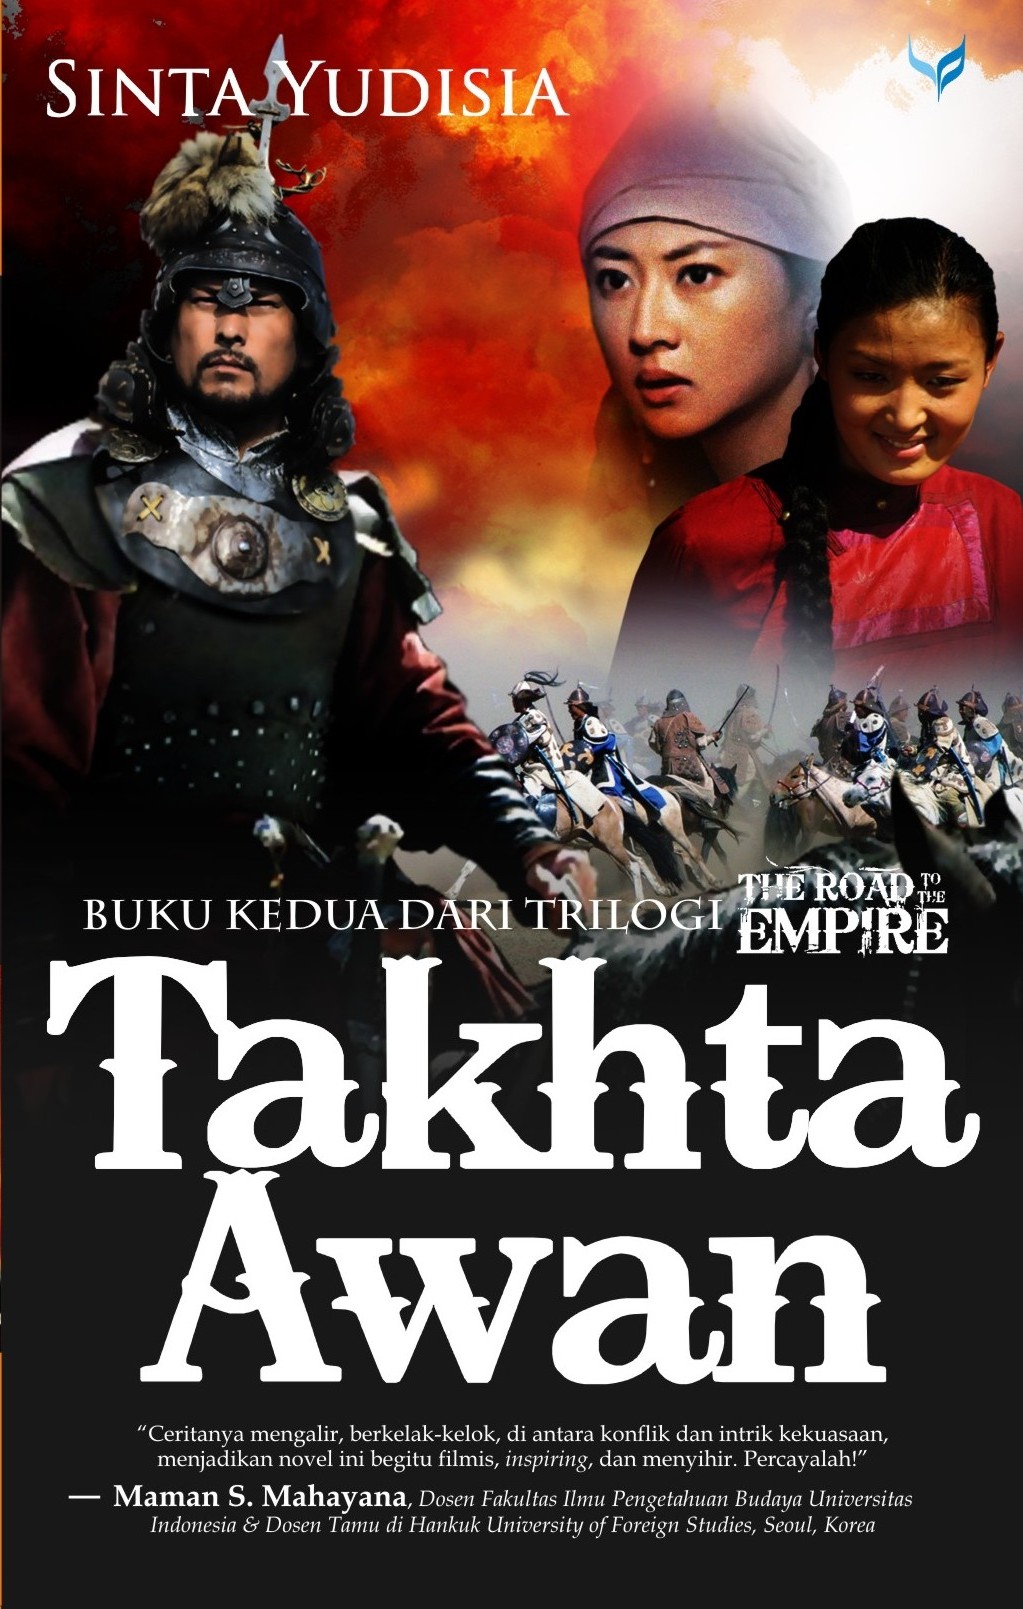 THE ROAD TO THE EMPIRE#2 TAKHTA AWAN